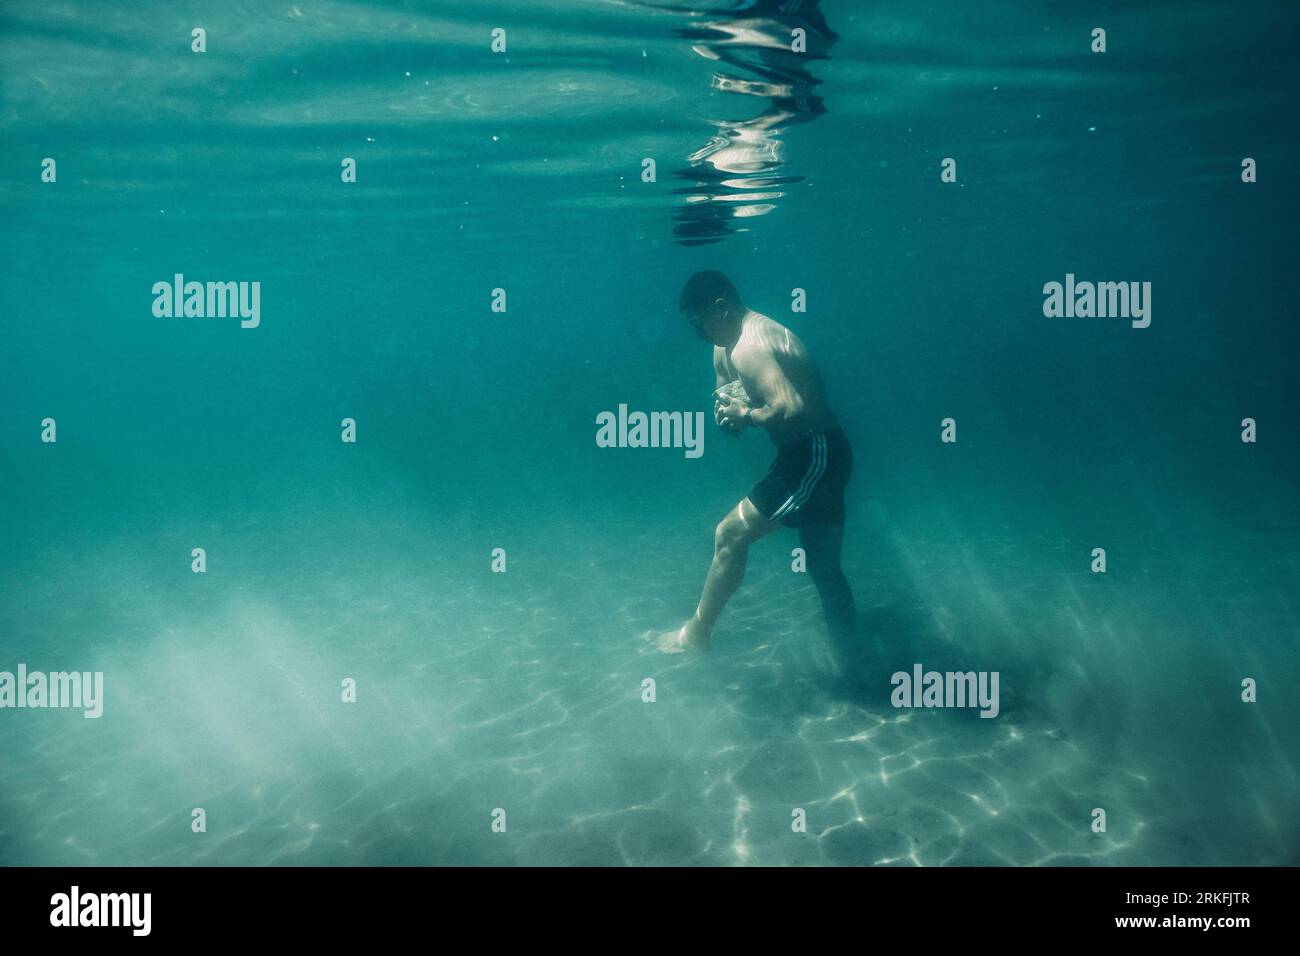 A young male walks across sand underwater. Stock Photo